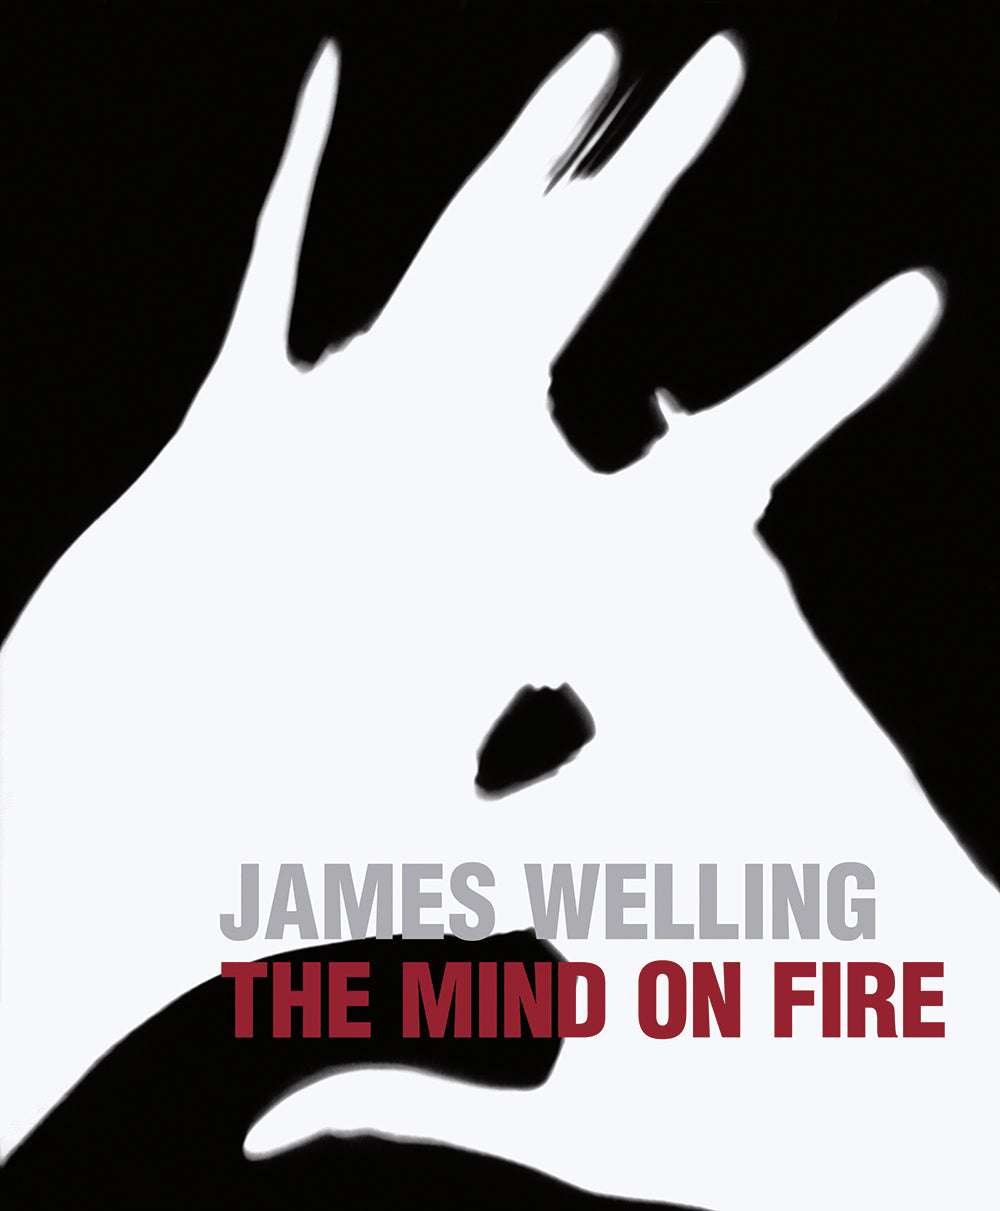 James Welling: The Mind on Fire